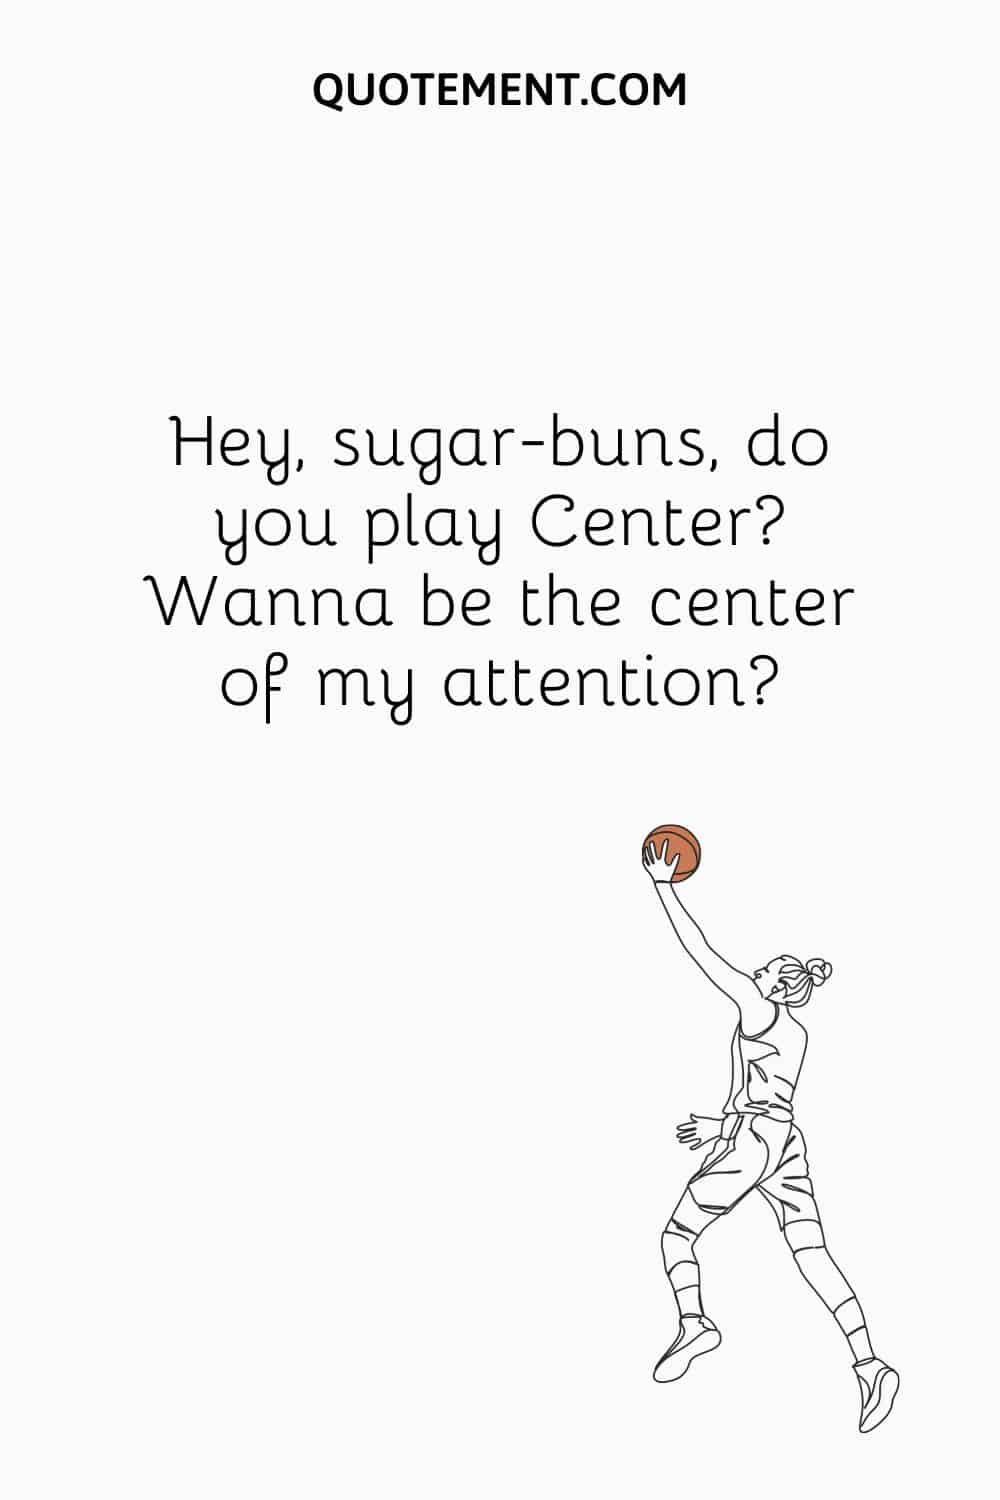 Hey, sugar-buns, do you play Center Wanna be the center of my attention